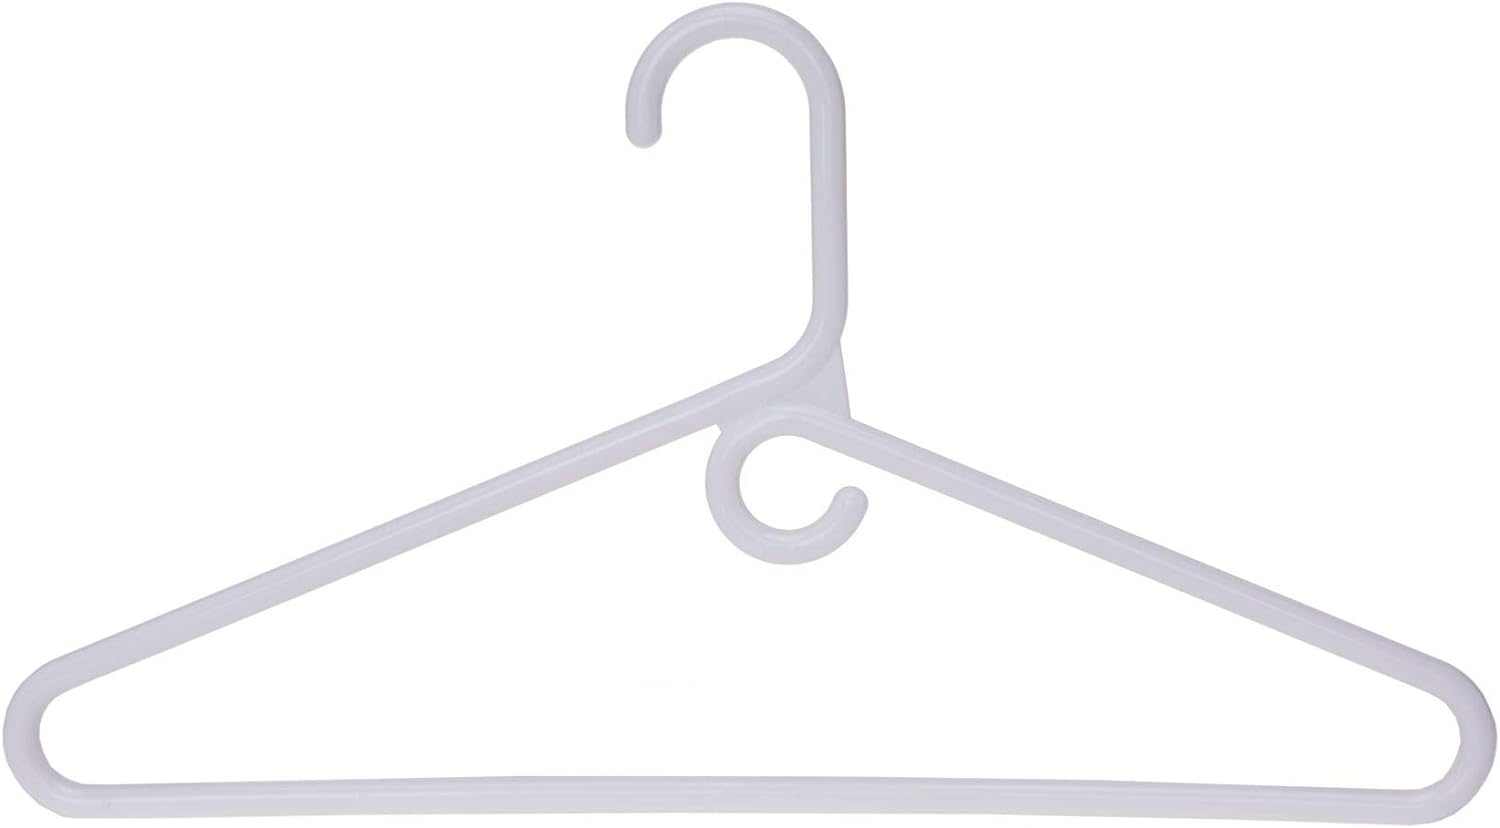 https://bigbigmart.com/wp-content/uploads/2023/12/Quality-White-Hangers-100-Pack-Super-Heavy-Duty-Plastic-Clothes-Hanger-Multipack-Thick-Strong-Standard-Closet-Clothing-Hangers-with-Hook-for-Scarves-and-Belts-17-Coat-Hangers-White-1005.jpg